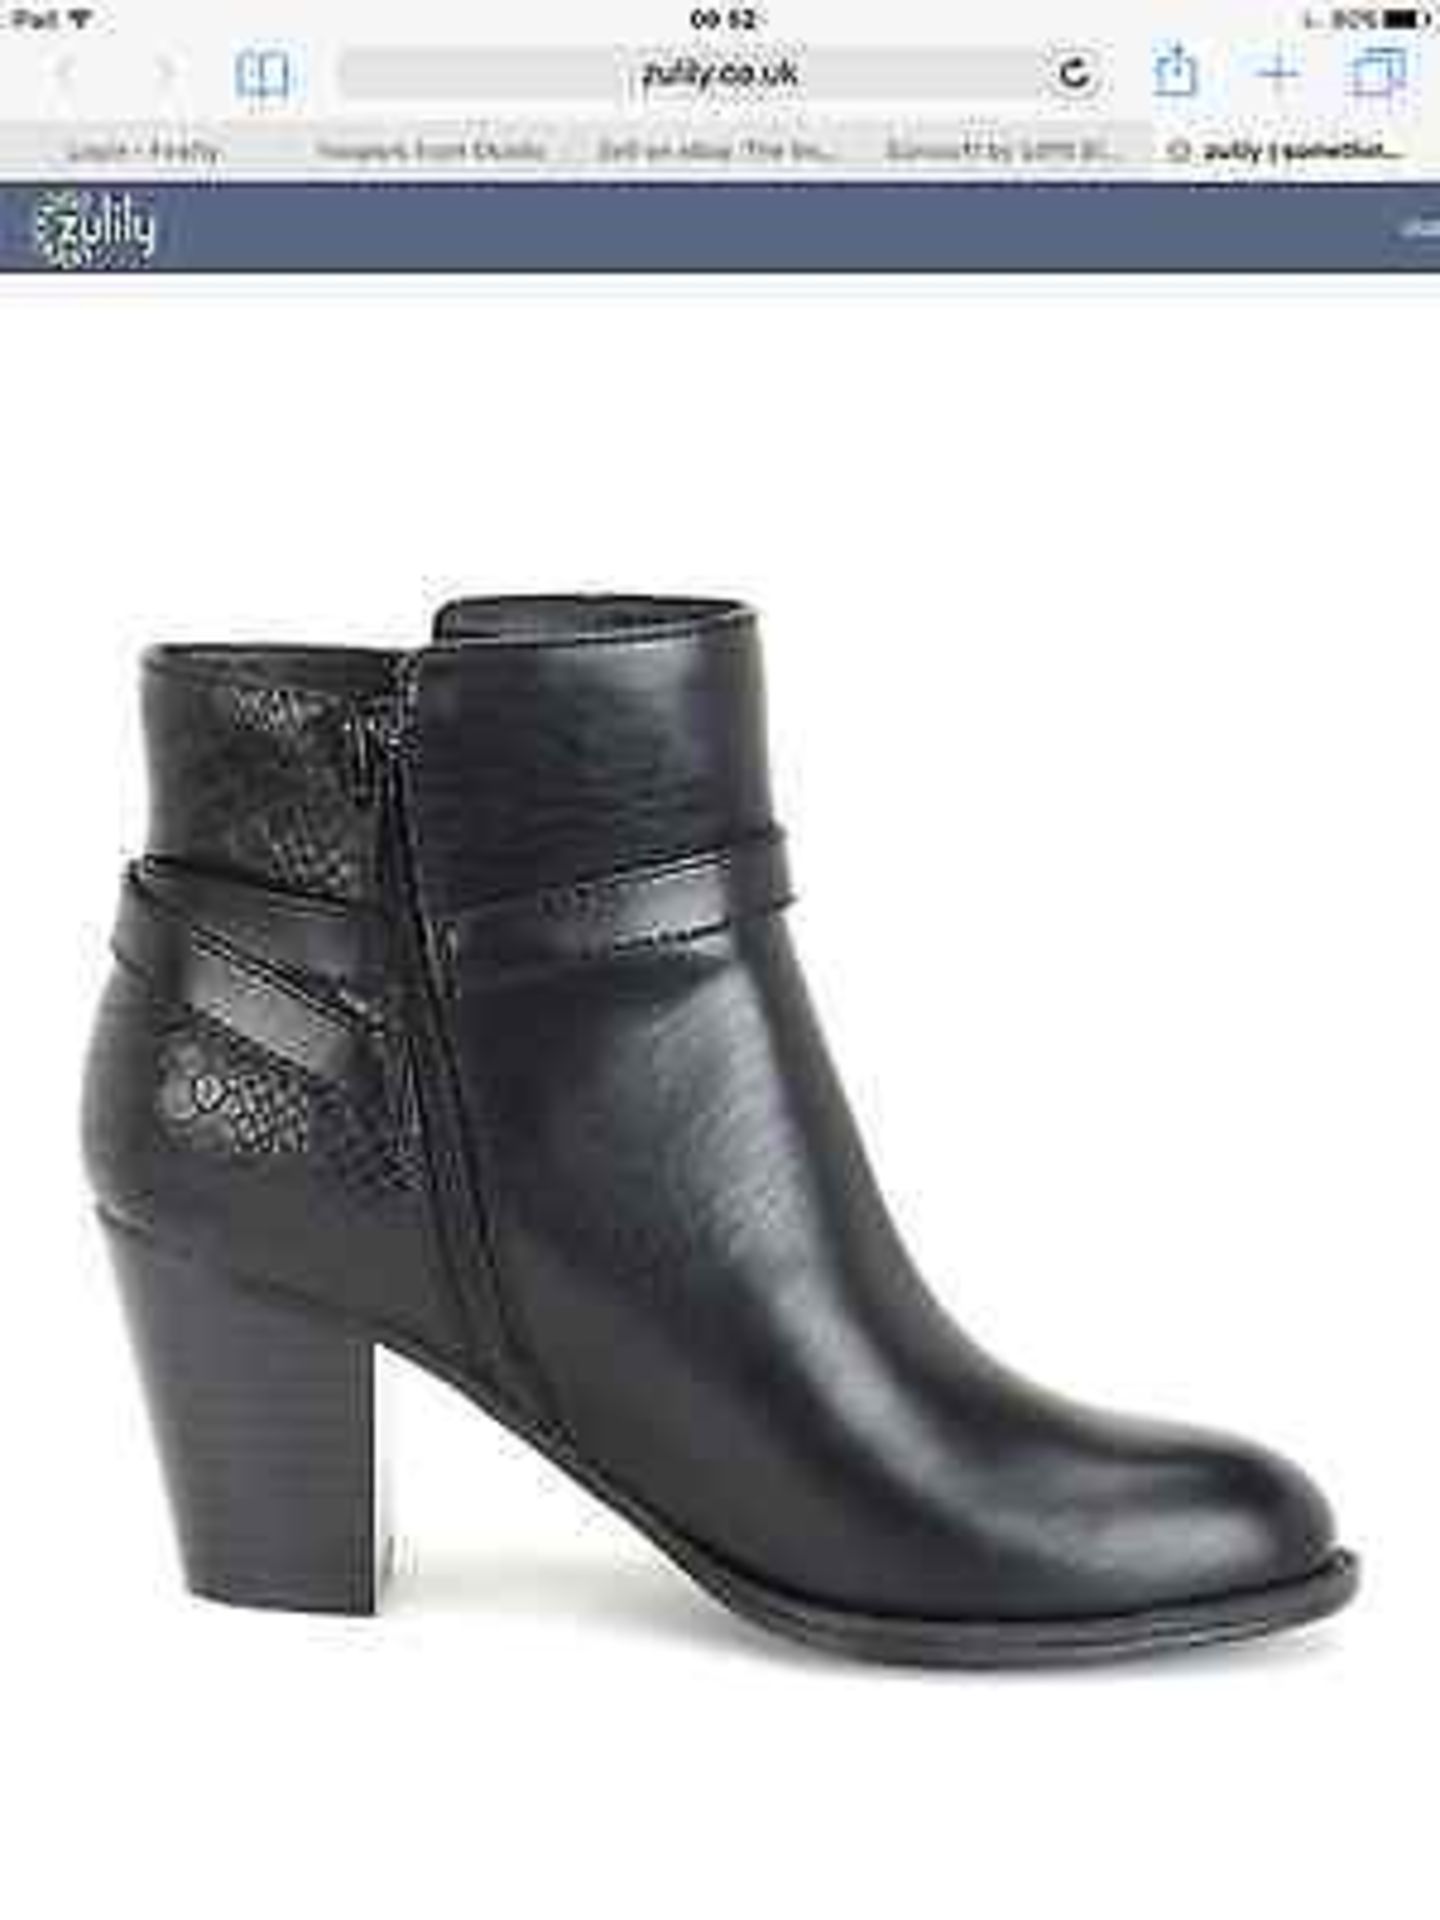 Euro Soft Black Sigourney Ankle Boot, Size EUR 38 (New with box) - Image 3 of 5